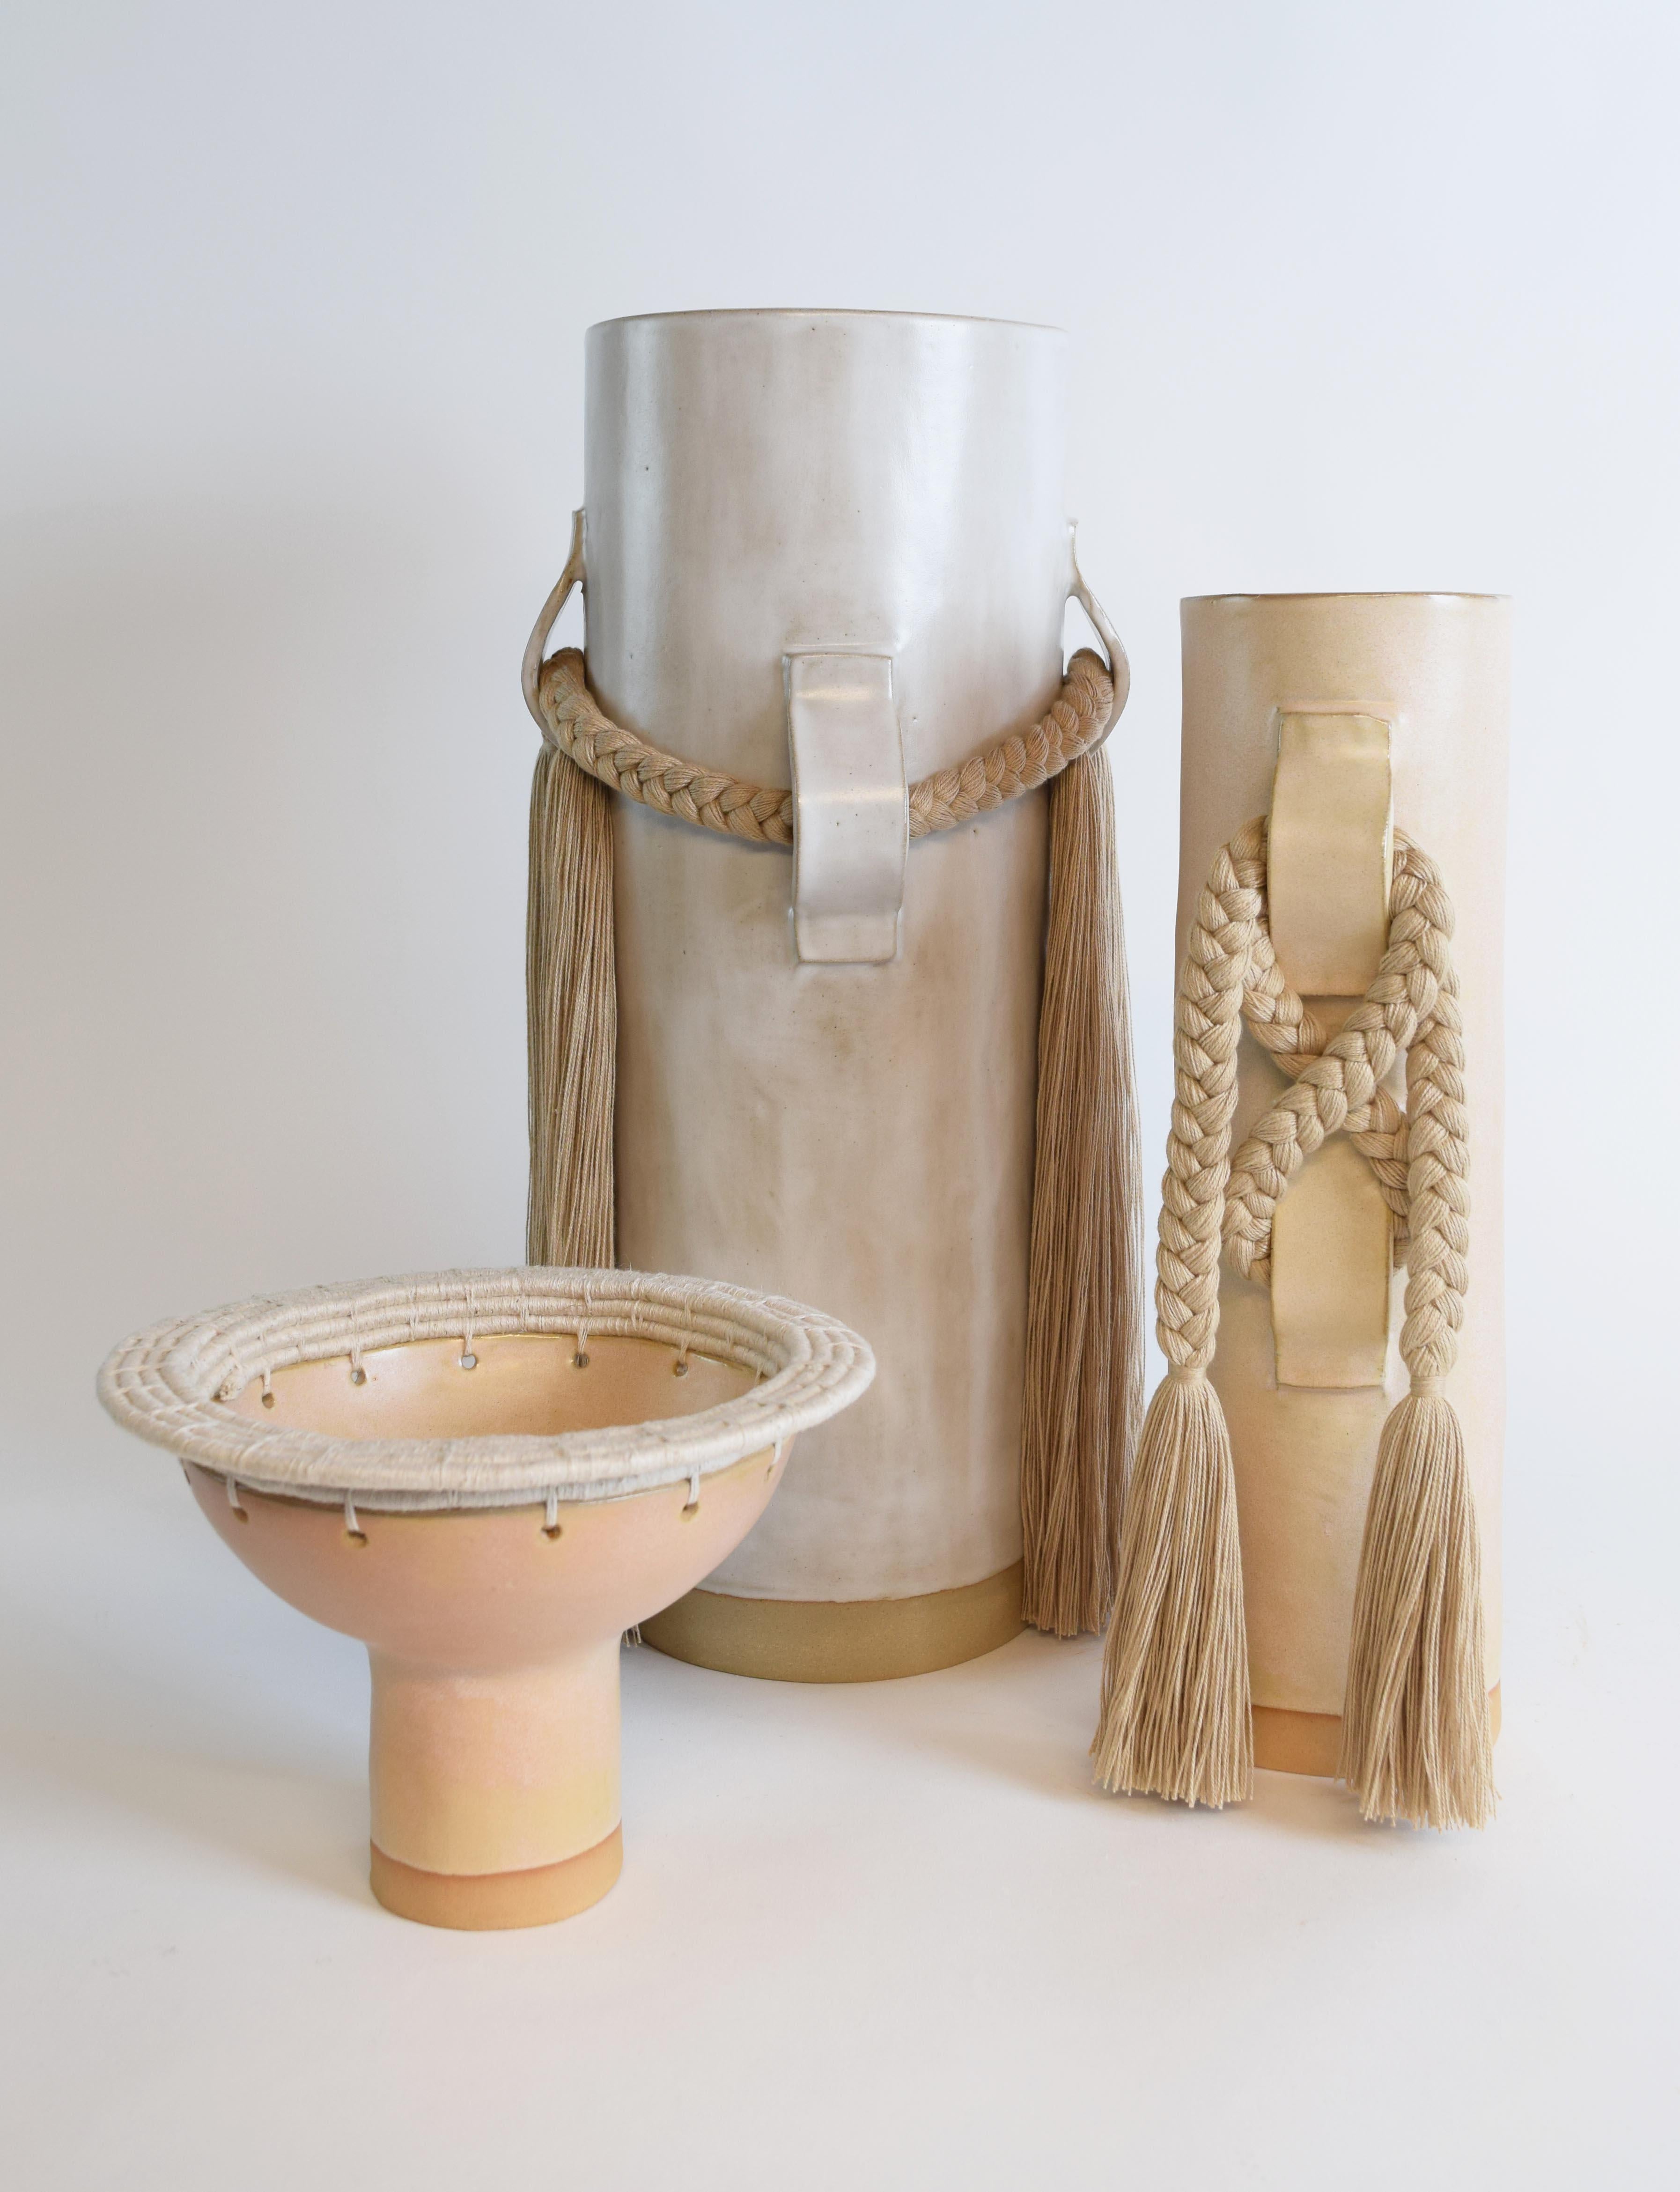 Contemporary Handmade Ceramic Vase #696 in Satin Tan with Tan Cotton Braid and Fringe For Sale